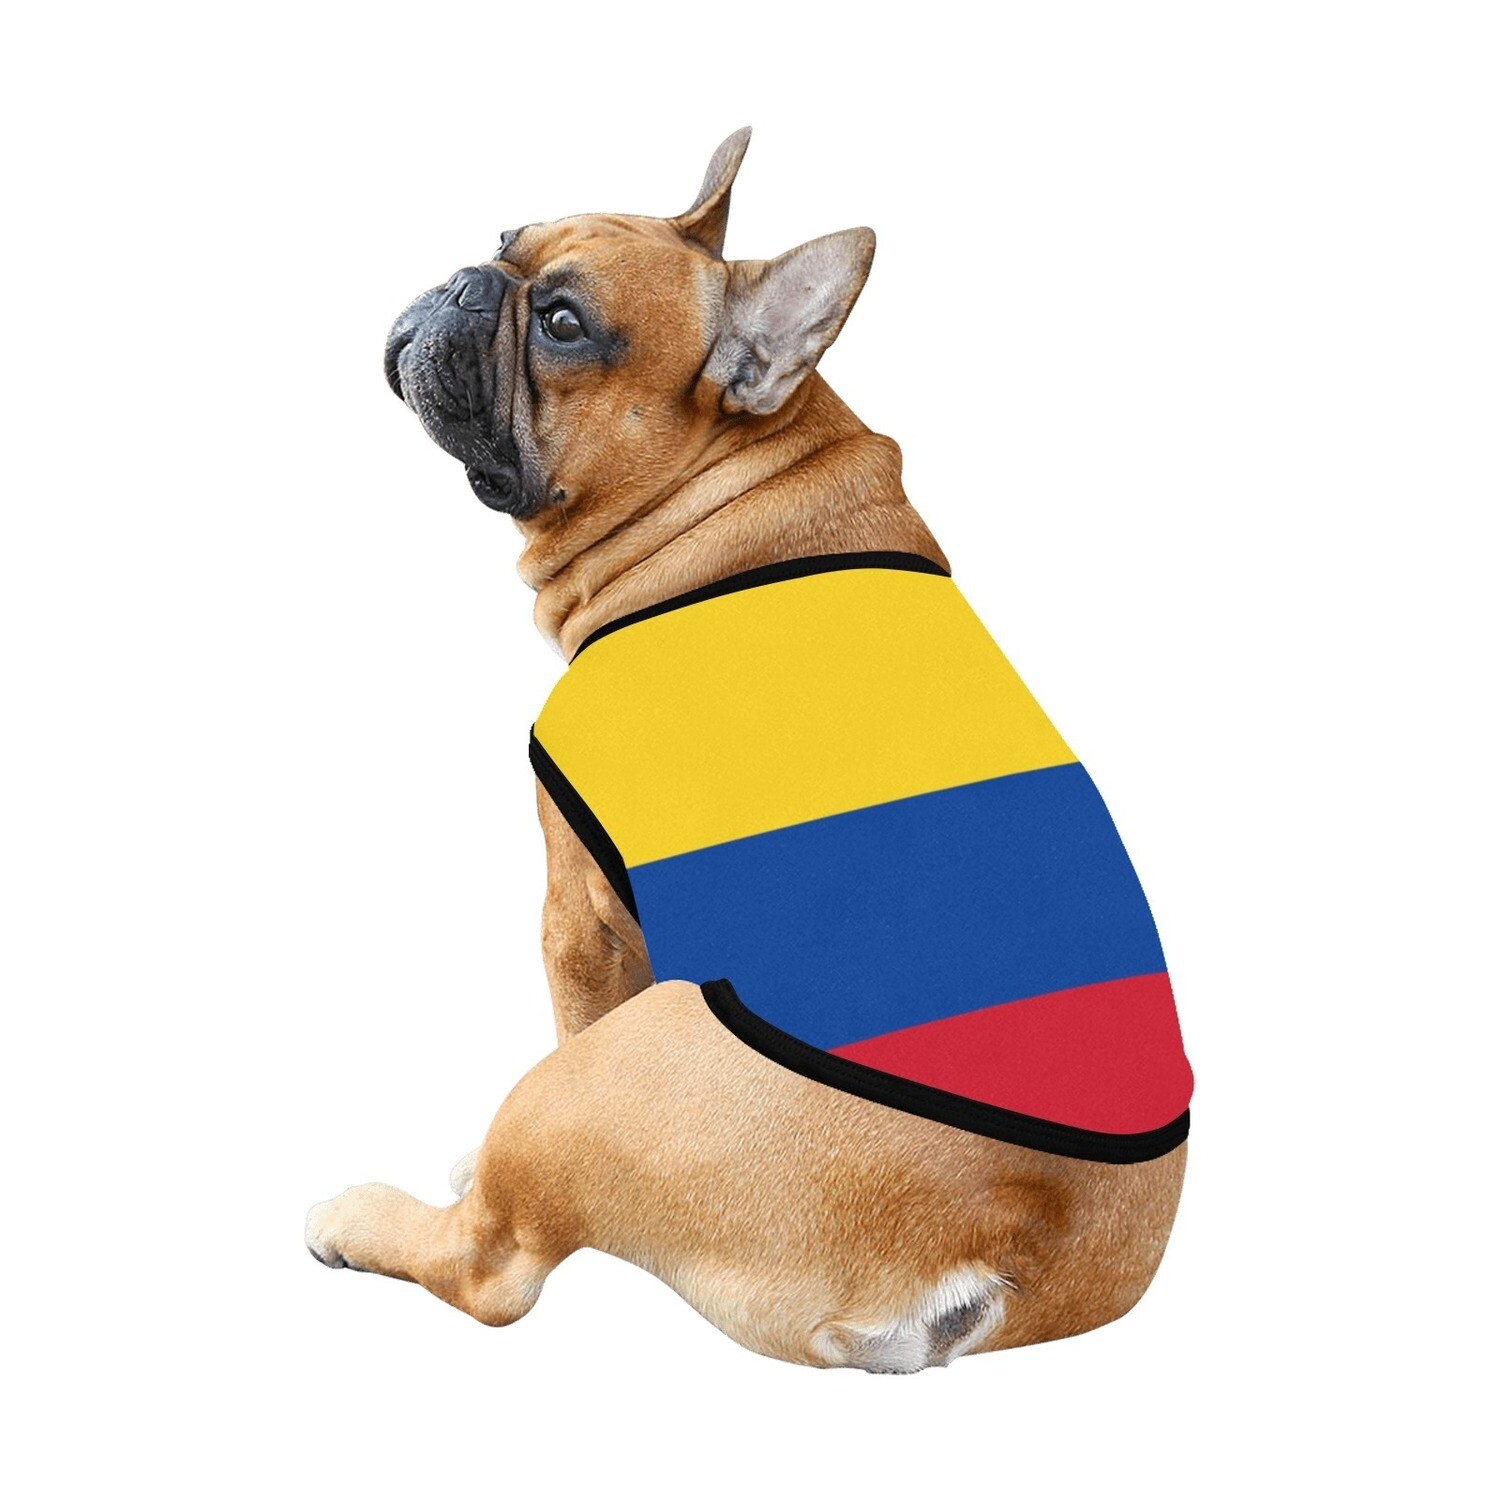 🐕🇨🇴 I love Colombia dog t-shirt, dog gift, dog tank top, dog shirt, dog clothes, gift, 7 sizes XS to 3XL, big Colombian flag